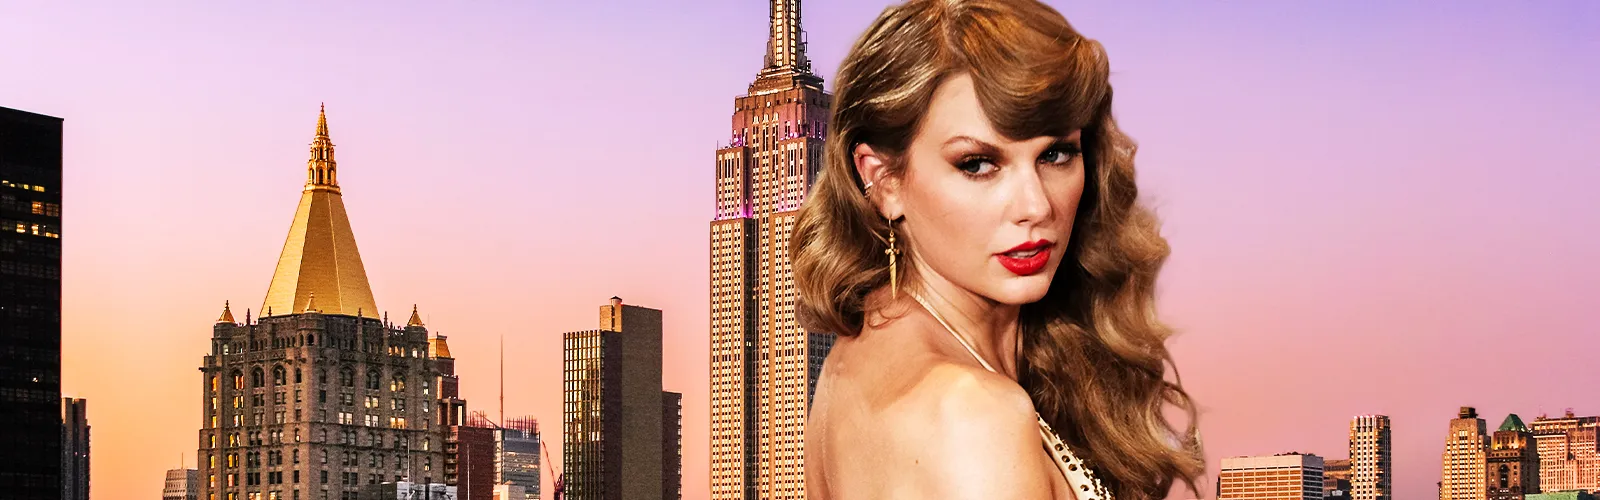 Taylor Swift’s Enthralling Craze Lights Up The Empire State Building